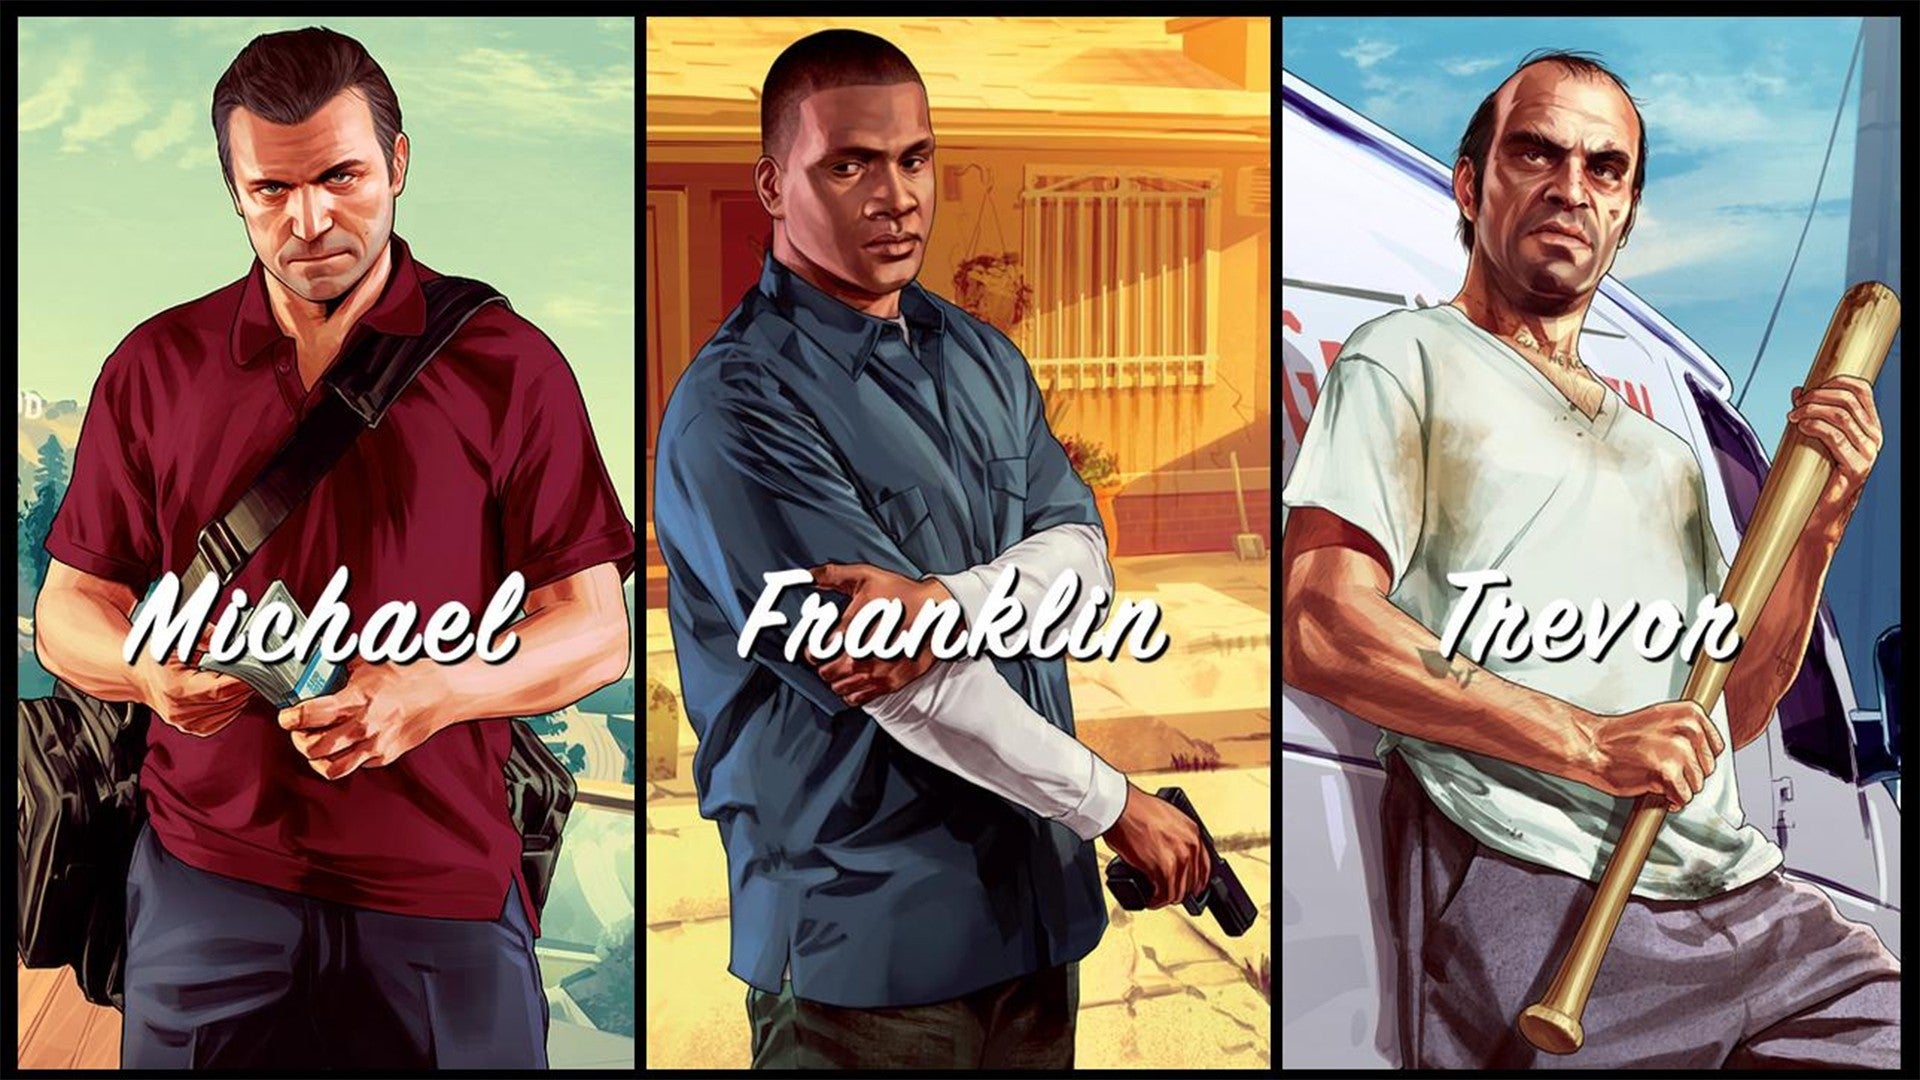 GTA 5 First gameplay trailer released by Rockstar, release date of